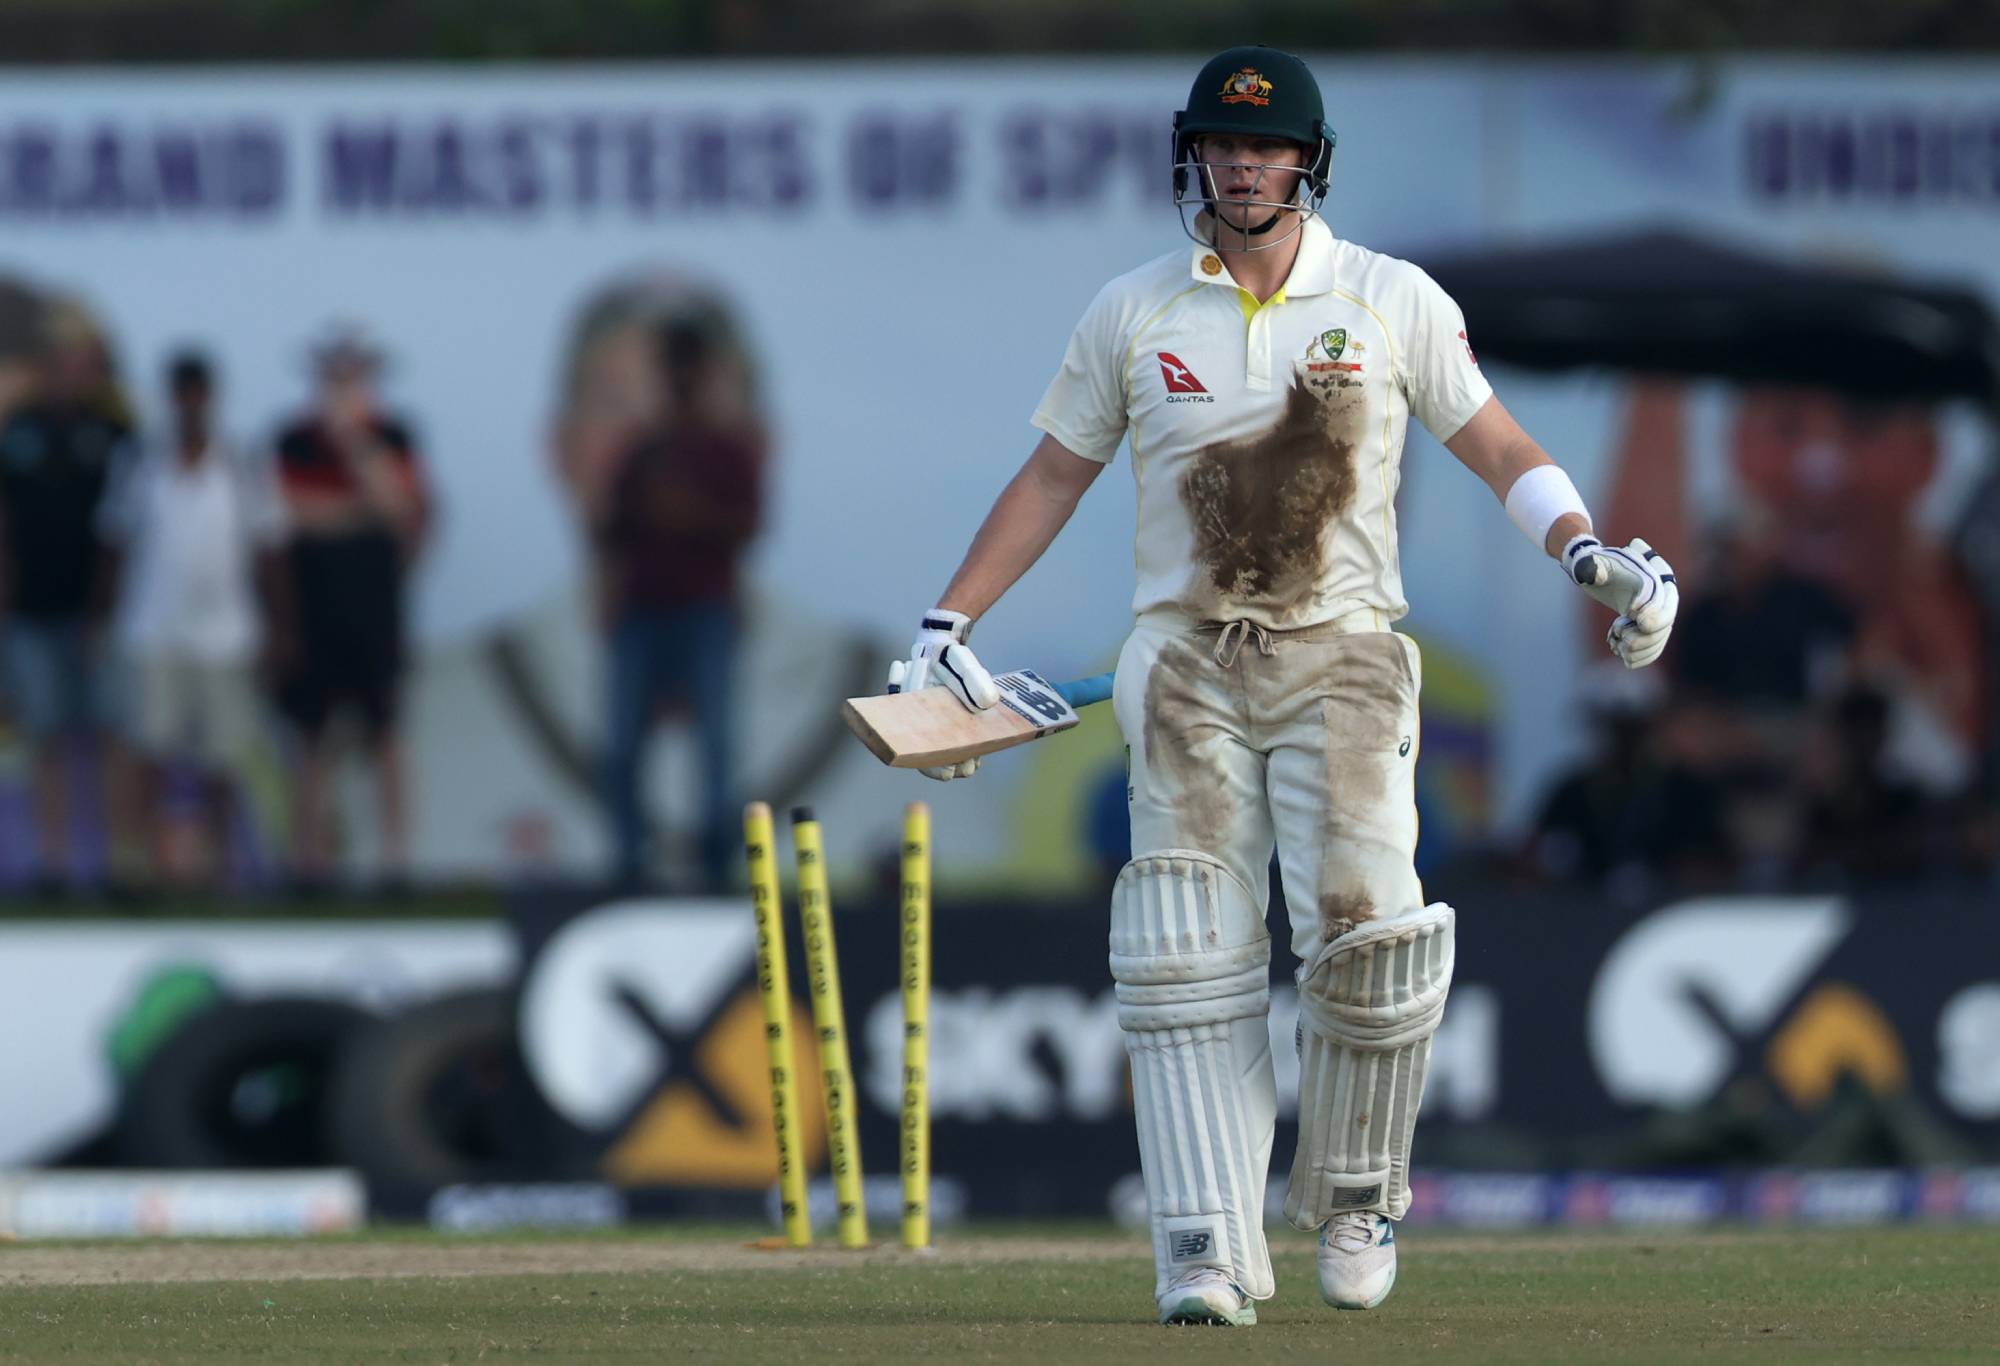 GALLE, SRI LANKA - JUNE 29: Steven Smith of Australia reacts after being runout by Niroshan Dickwella of Sri Lanka during day one of the First Test in the series between Sri Lanka and Australia at Galle International Stadium on June 29, 2022 in Galle, Sri Lanka. (Photo by Buddhika Weerasinghe/Getty Images)